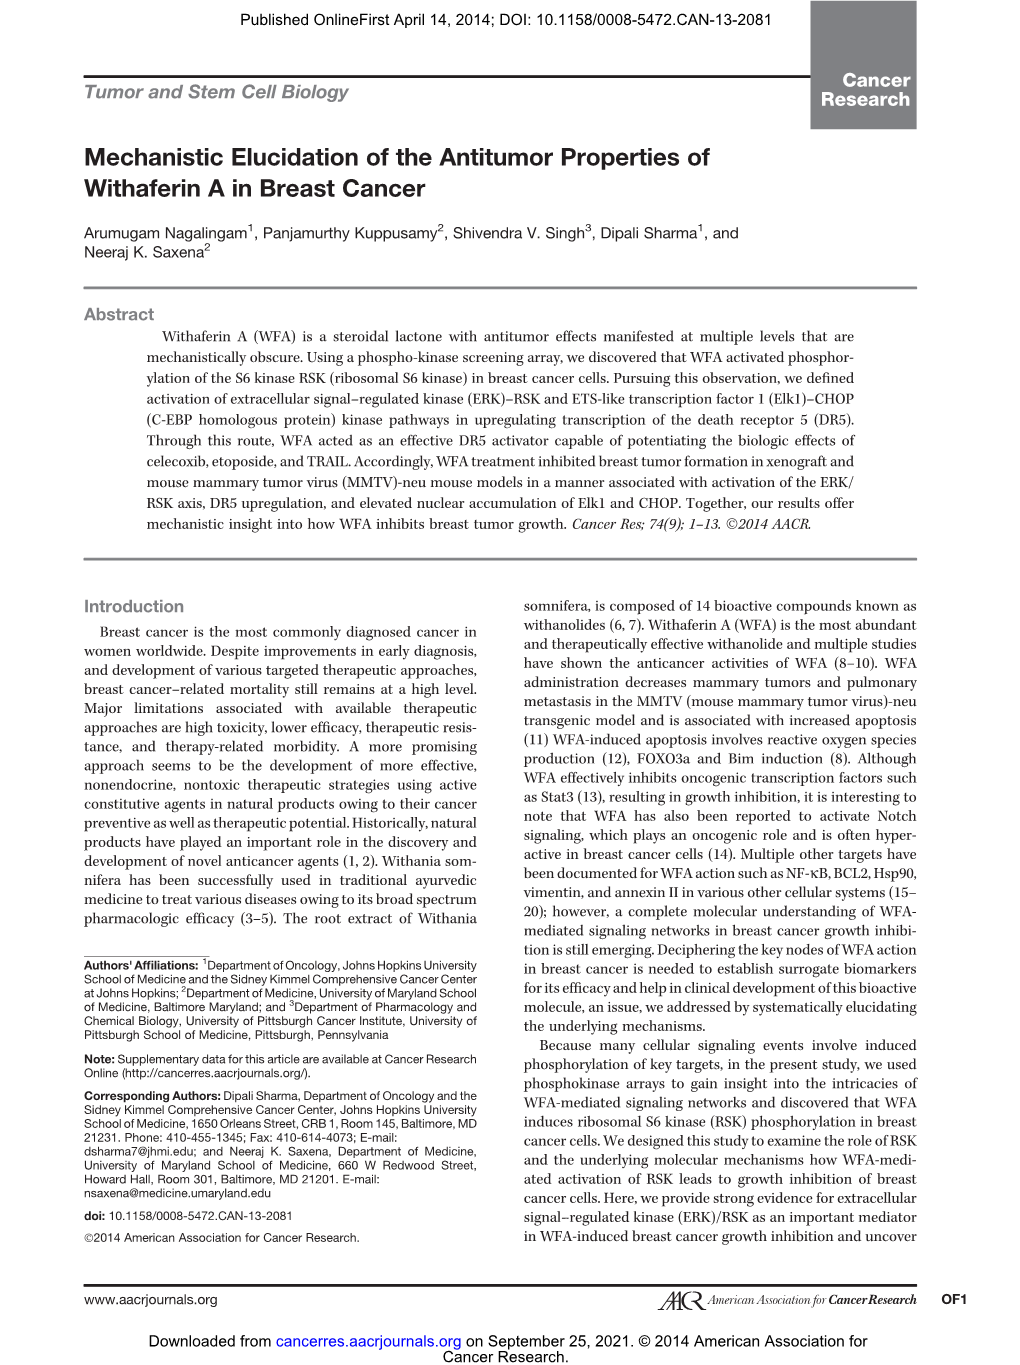 Mechanistic Elucidation of the Antitumor Properties of Withaferin a in Breast Cancer